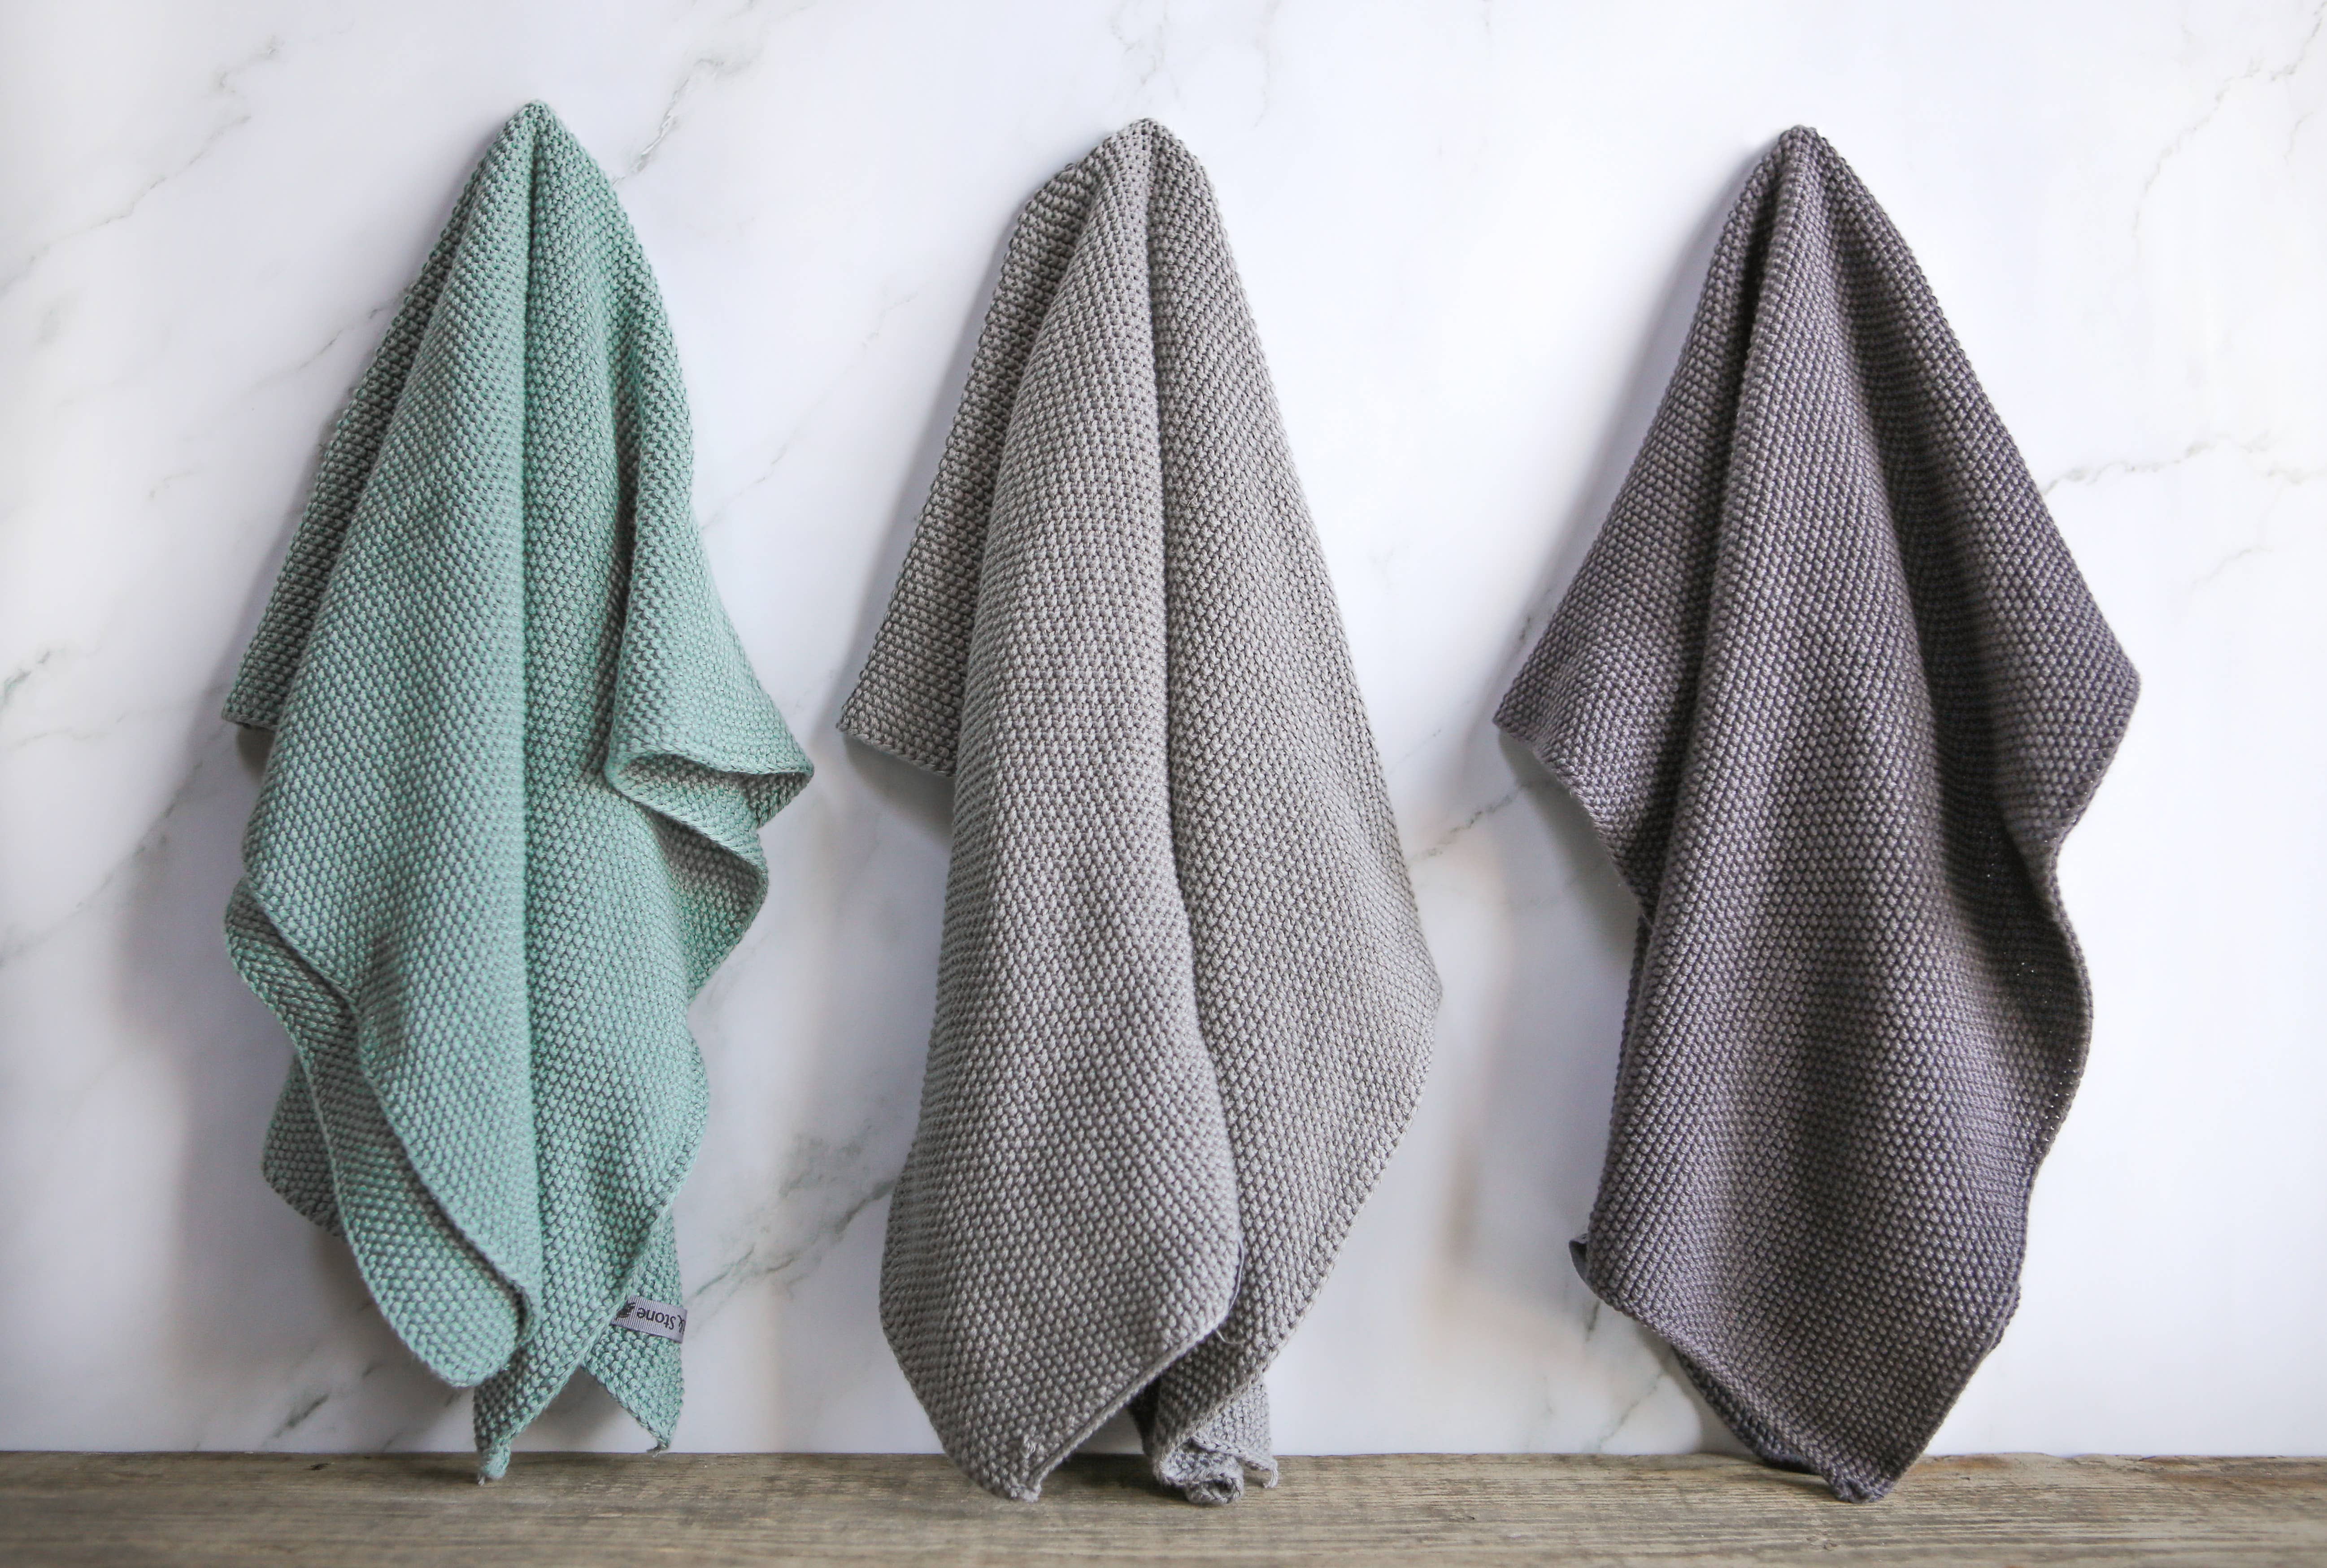 Eco Hand Towels Perfect For Around The Home Wild & Stone Slate Grey Organic Cotton Hand Towel Kitchen Towel